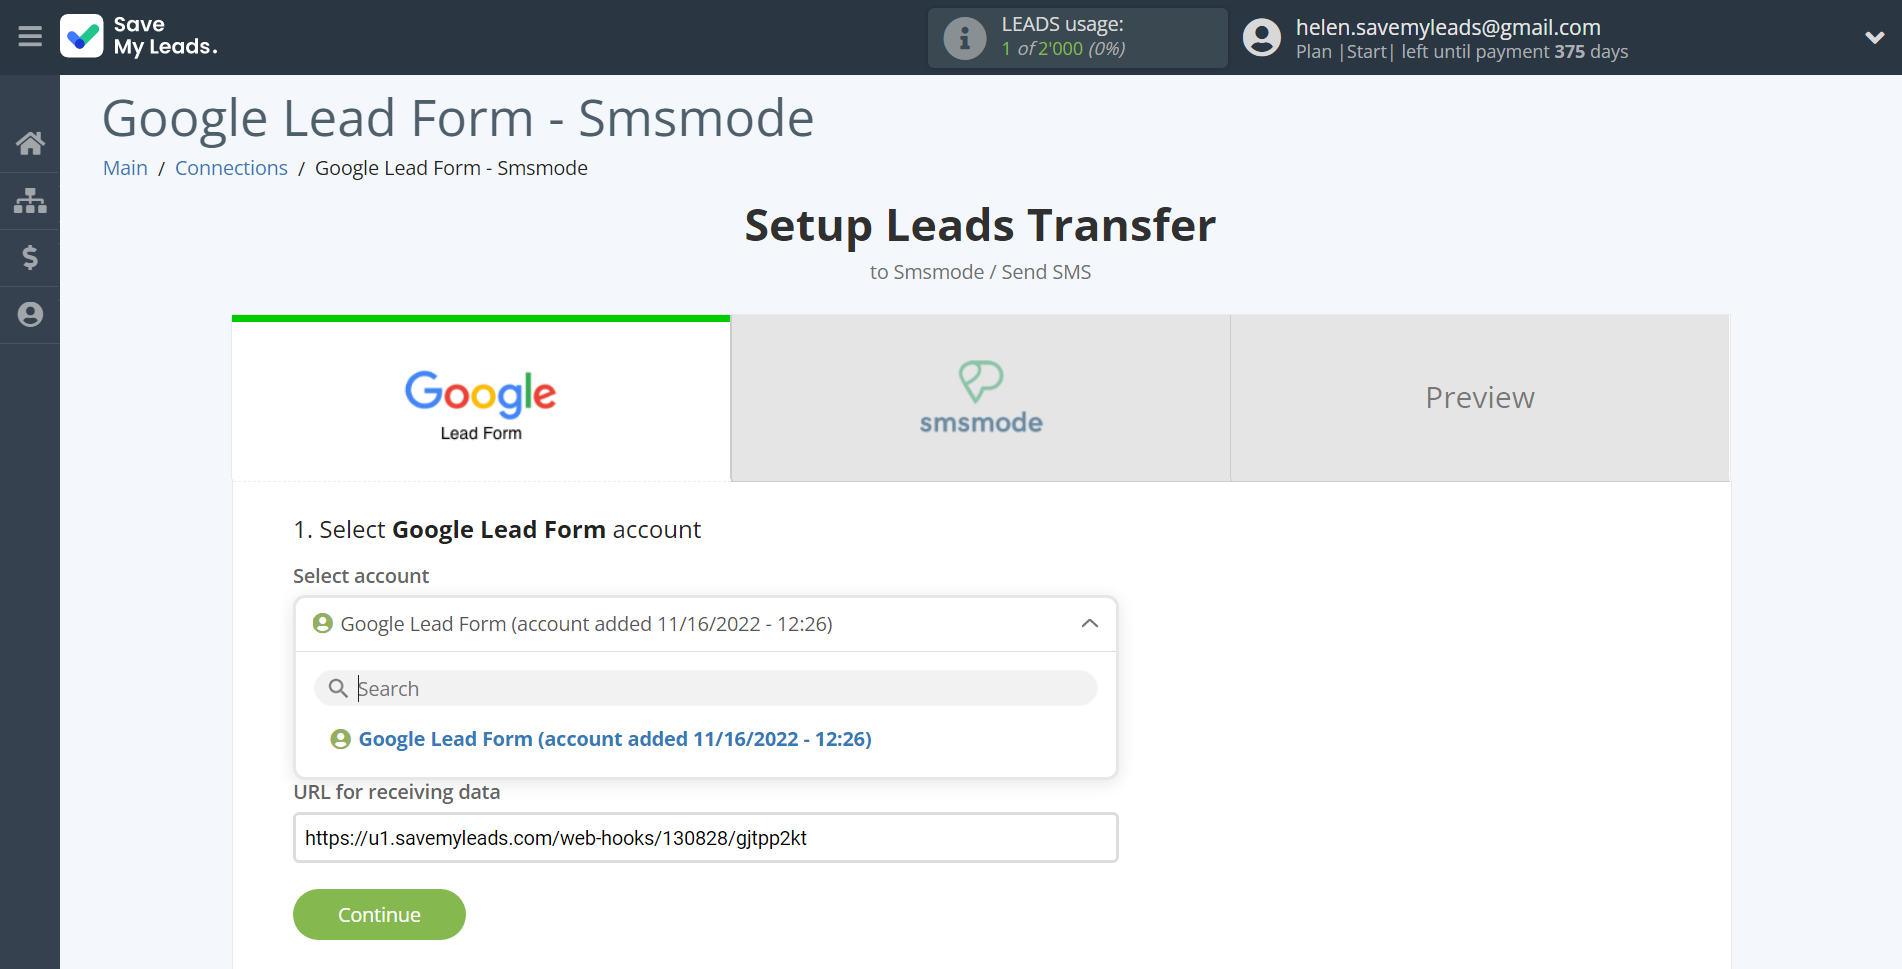 How to Connect Google Lead Form with Smsmode | Data Source account selection